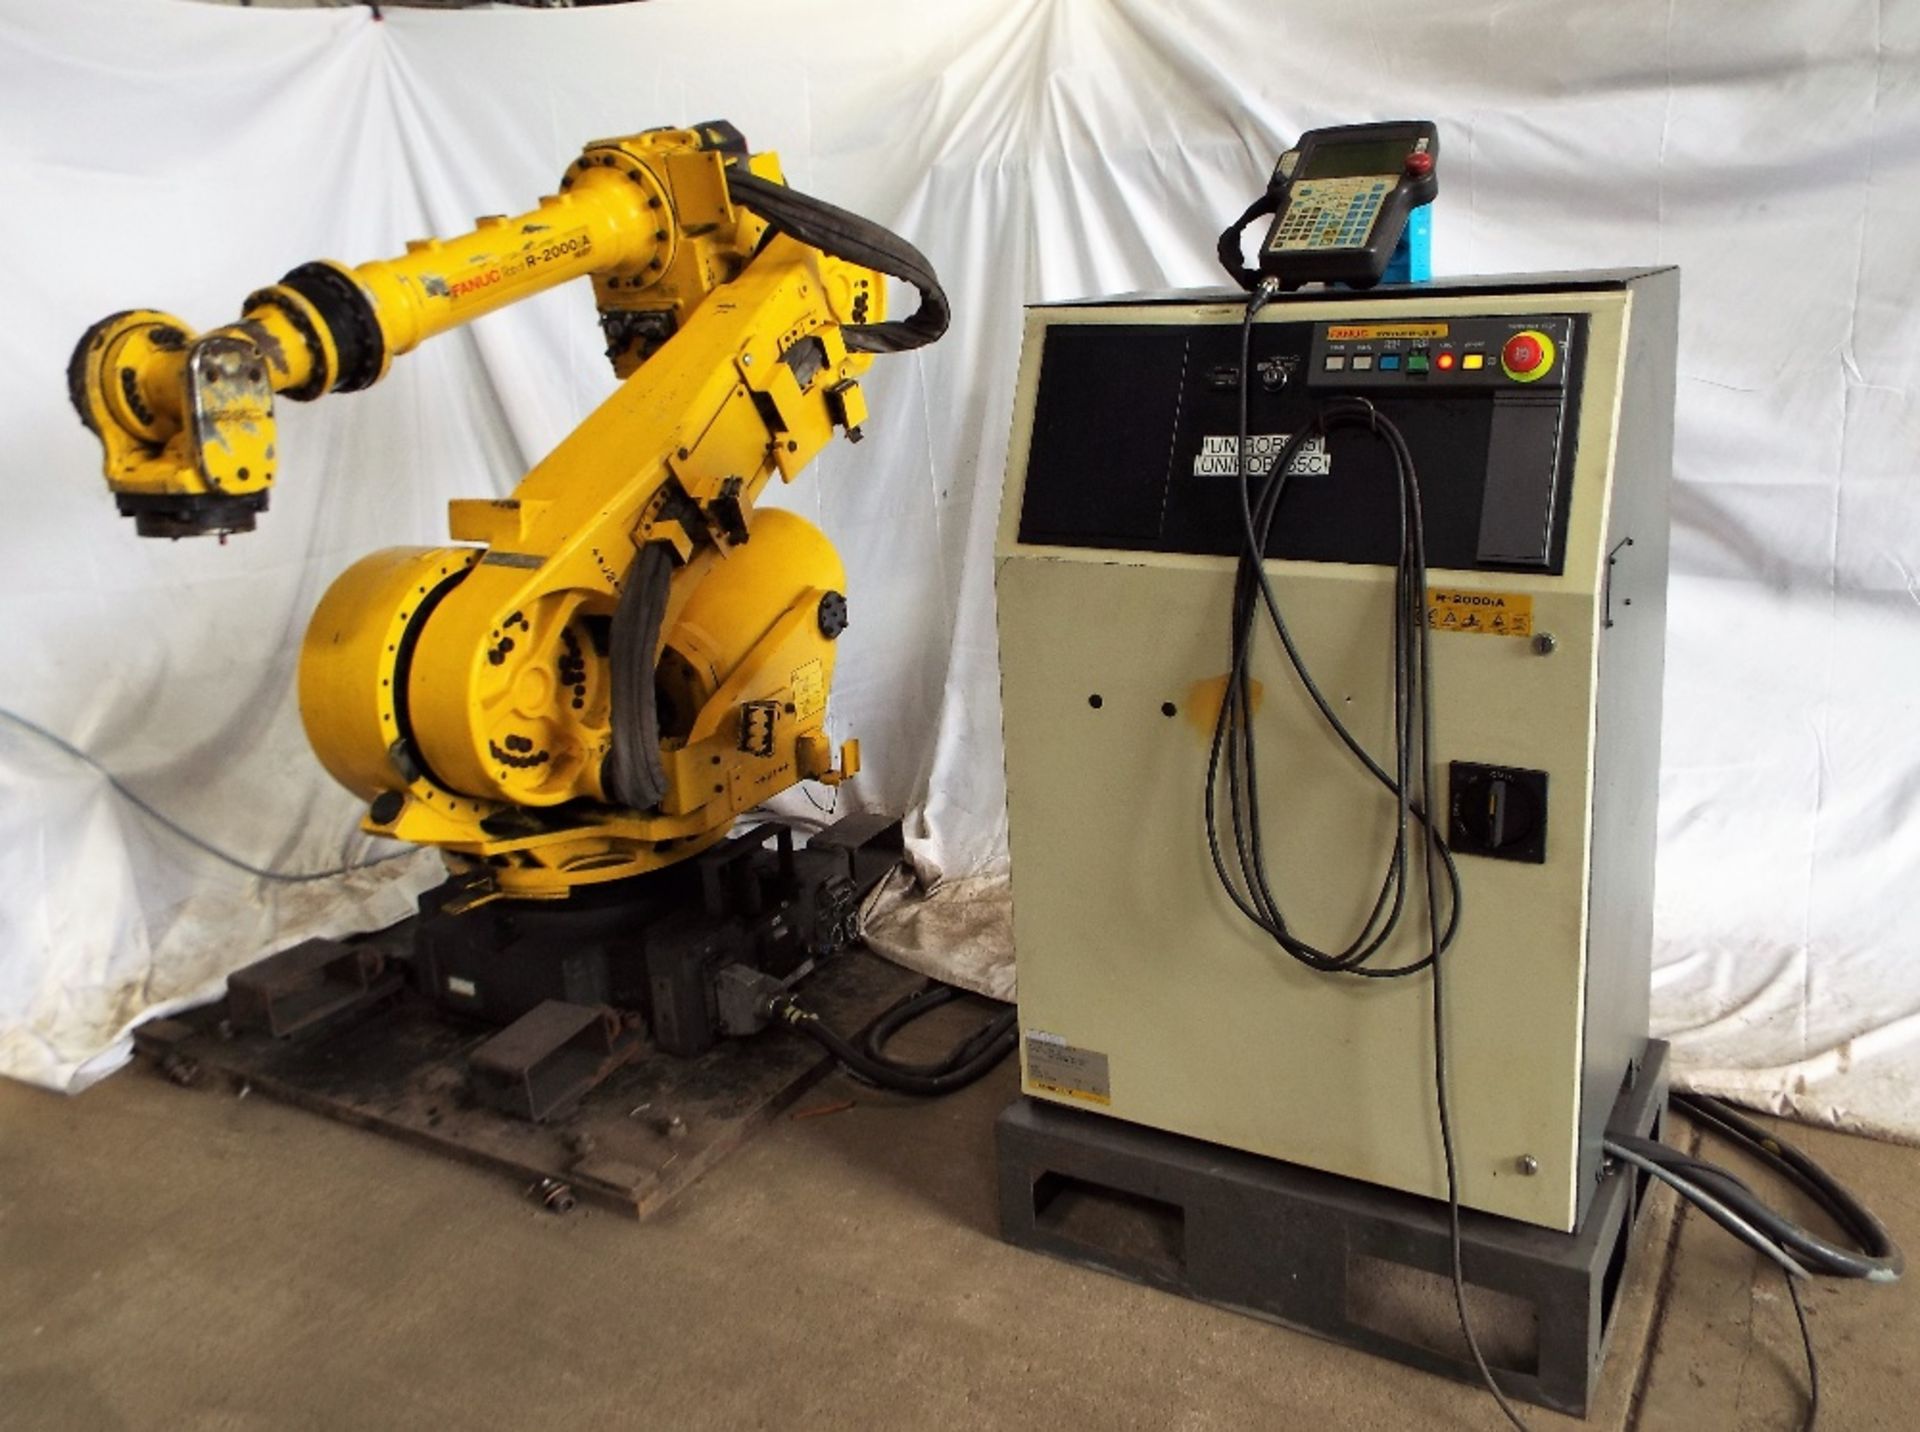 Fanuc Robot Type R-2000iA - 165F 6 Axis Industrial Robot.